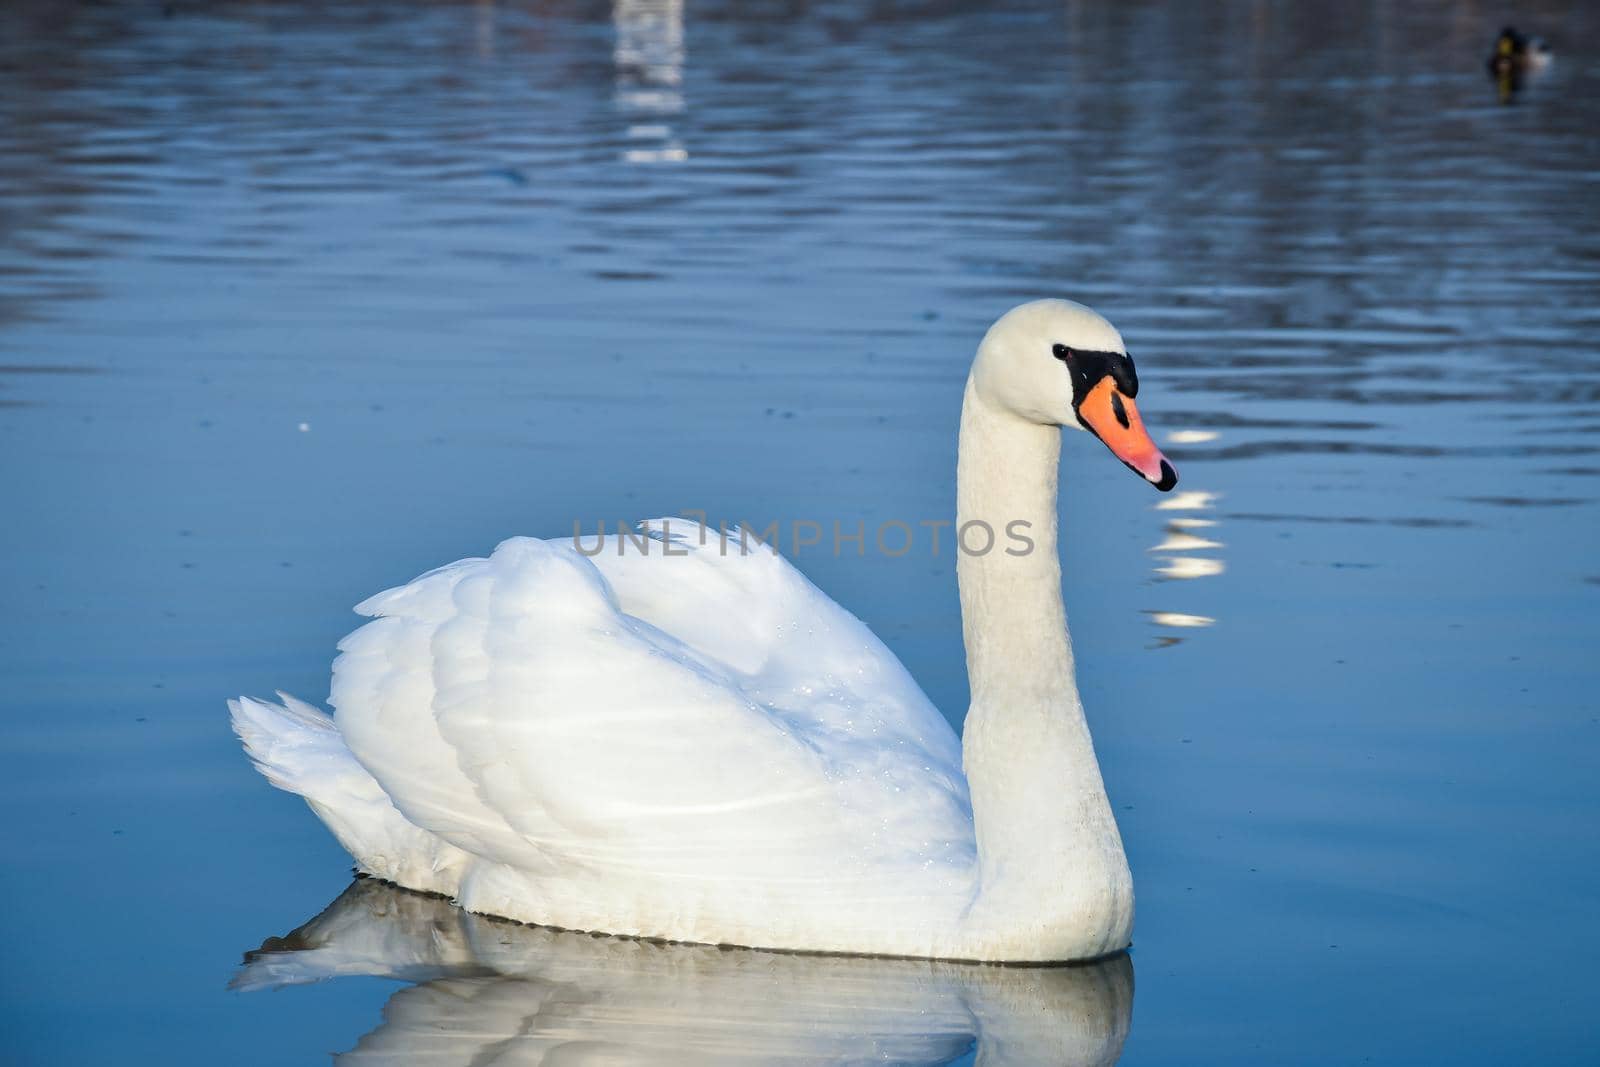 An eye-level shot of a single beautiful white swan floating on a calm water surface